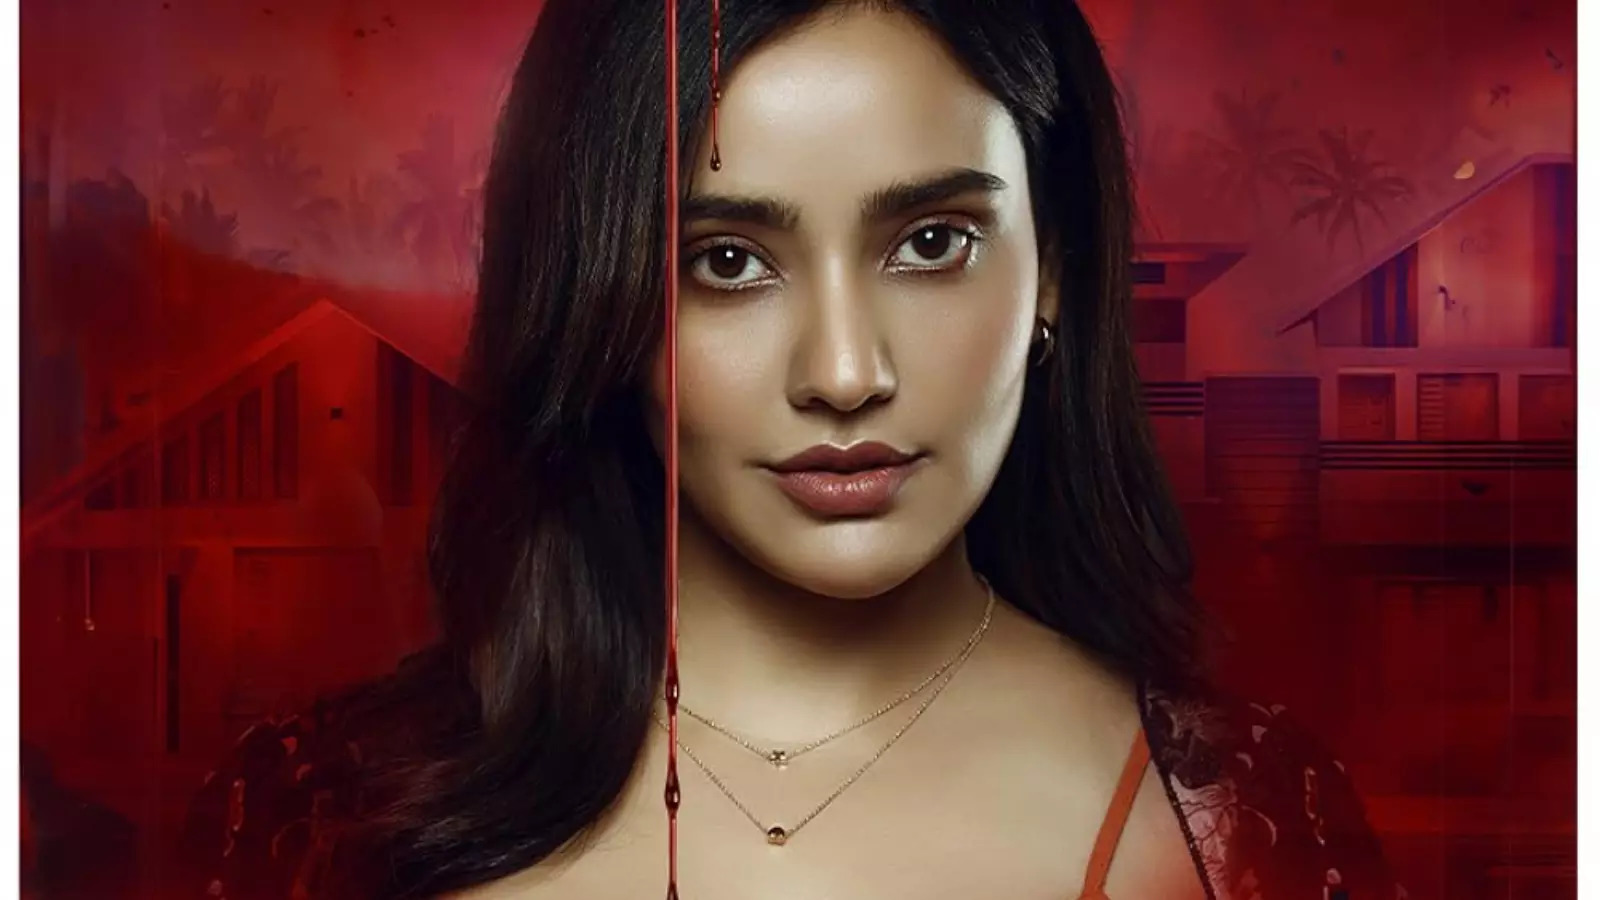 36 Days Review Neha Sharma Starrer Is A Lackluster Whodunnit With Predictable Plot Twists